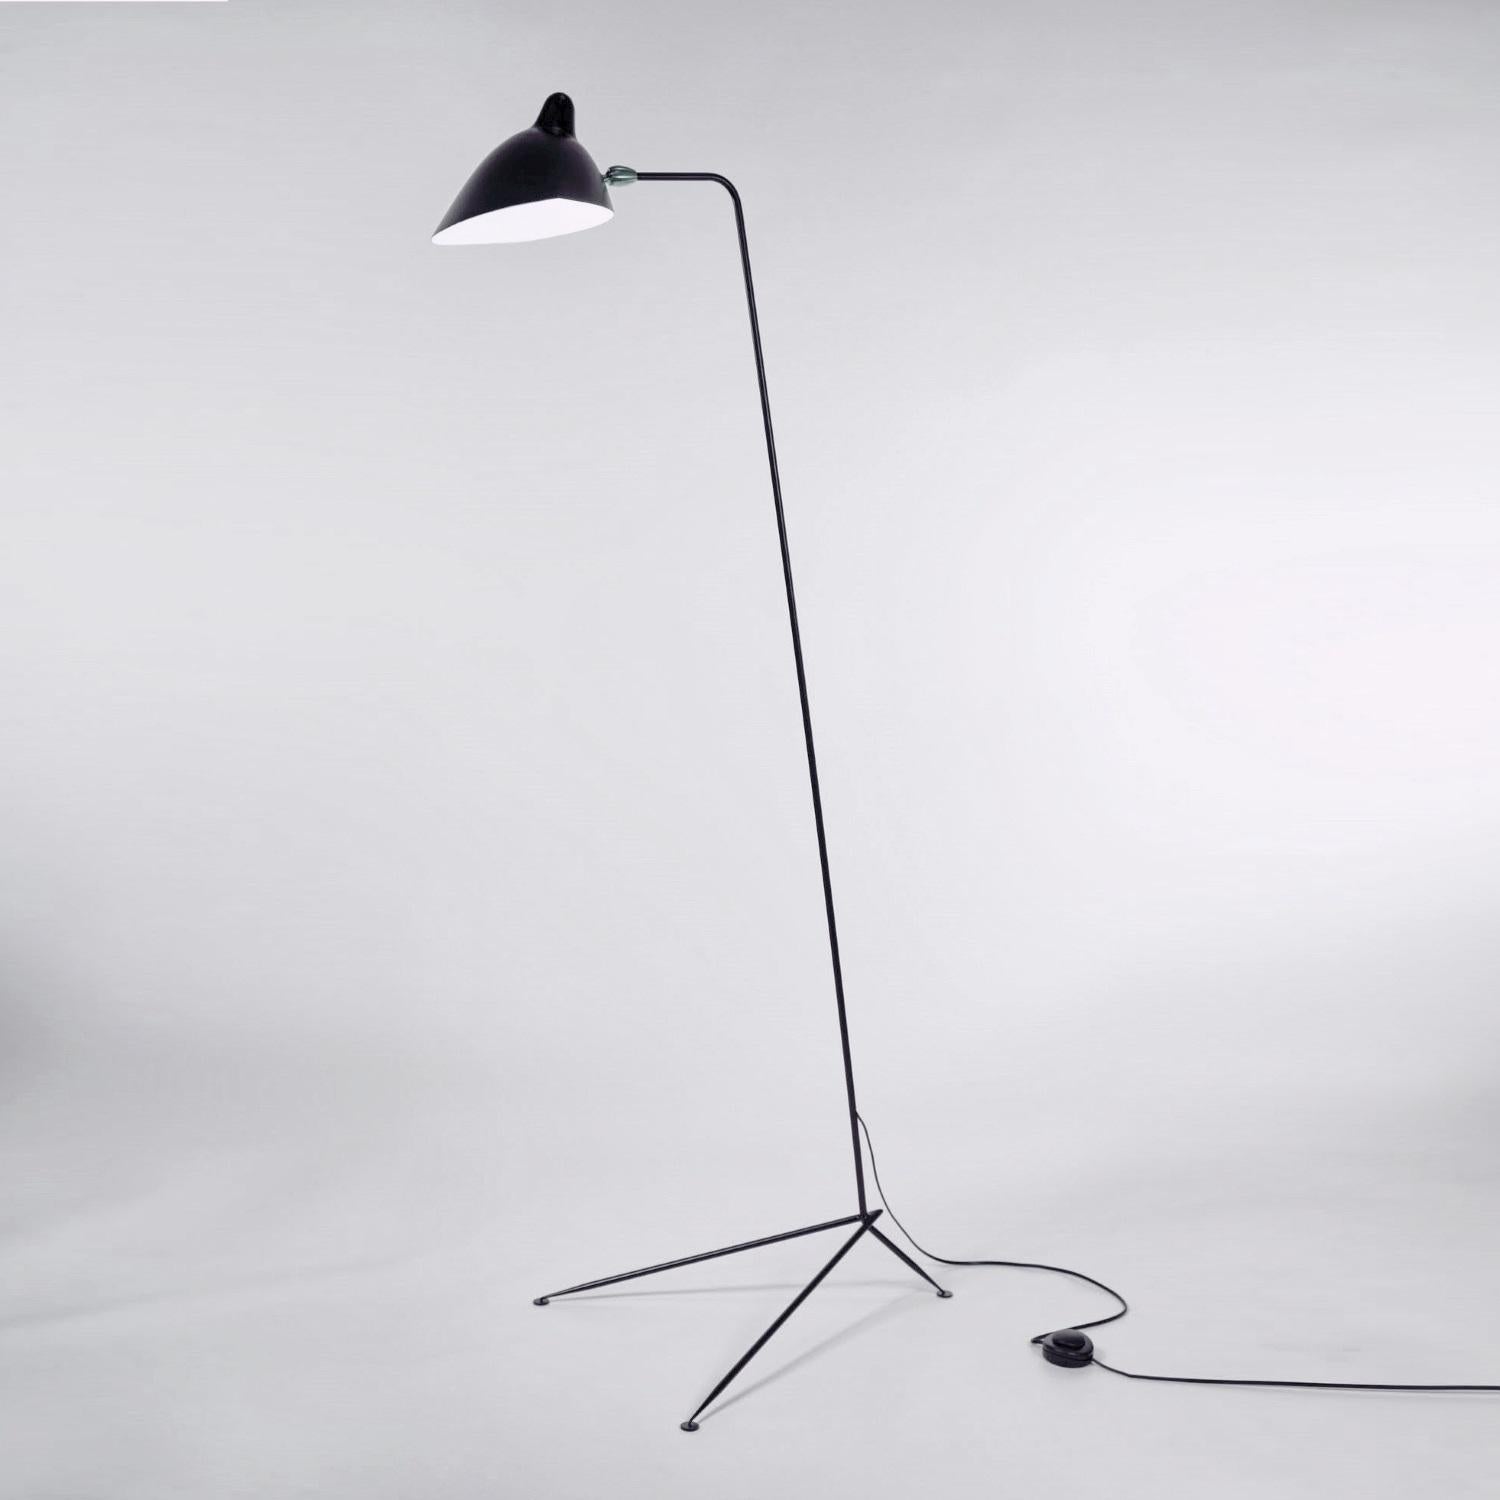 Clean, simple lines describe the elegance of this Serge Mouille floor lamp. A long, slender arm, supported by a tapered triangular base, allows the swiveling shade to illuminate at any angle. With brass accents. 
Available in black or white. 